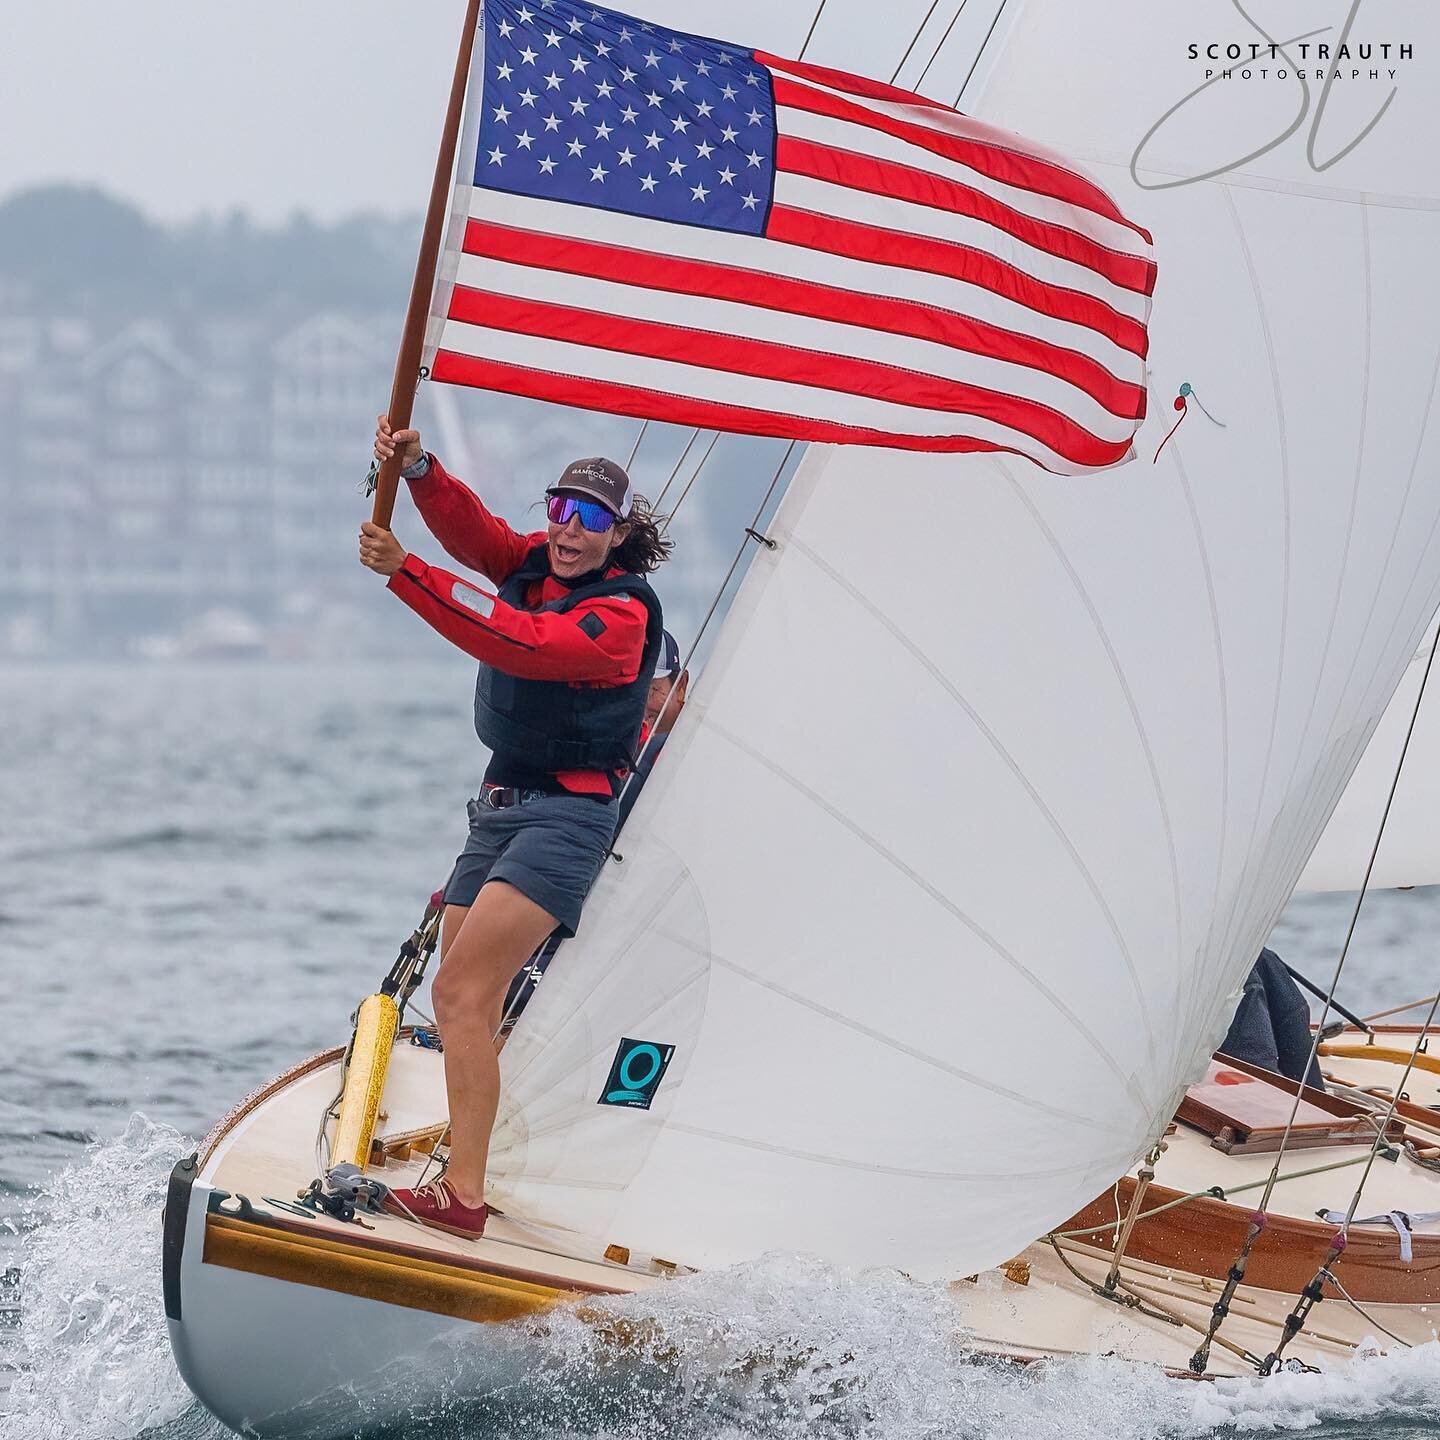 #frontendfriday Happy Independence Day Weekend!
@allisongfitz at the finish of the 2022 @iyac_newport Newport Cup Regatta. Tomorrow will be the next edition of this regatta and we will be there to cover it!
#newportri #sailing #sailinglife #iyac #iya